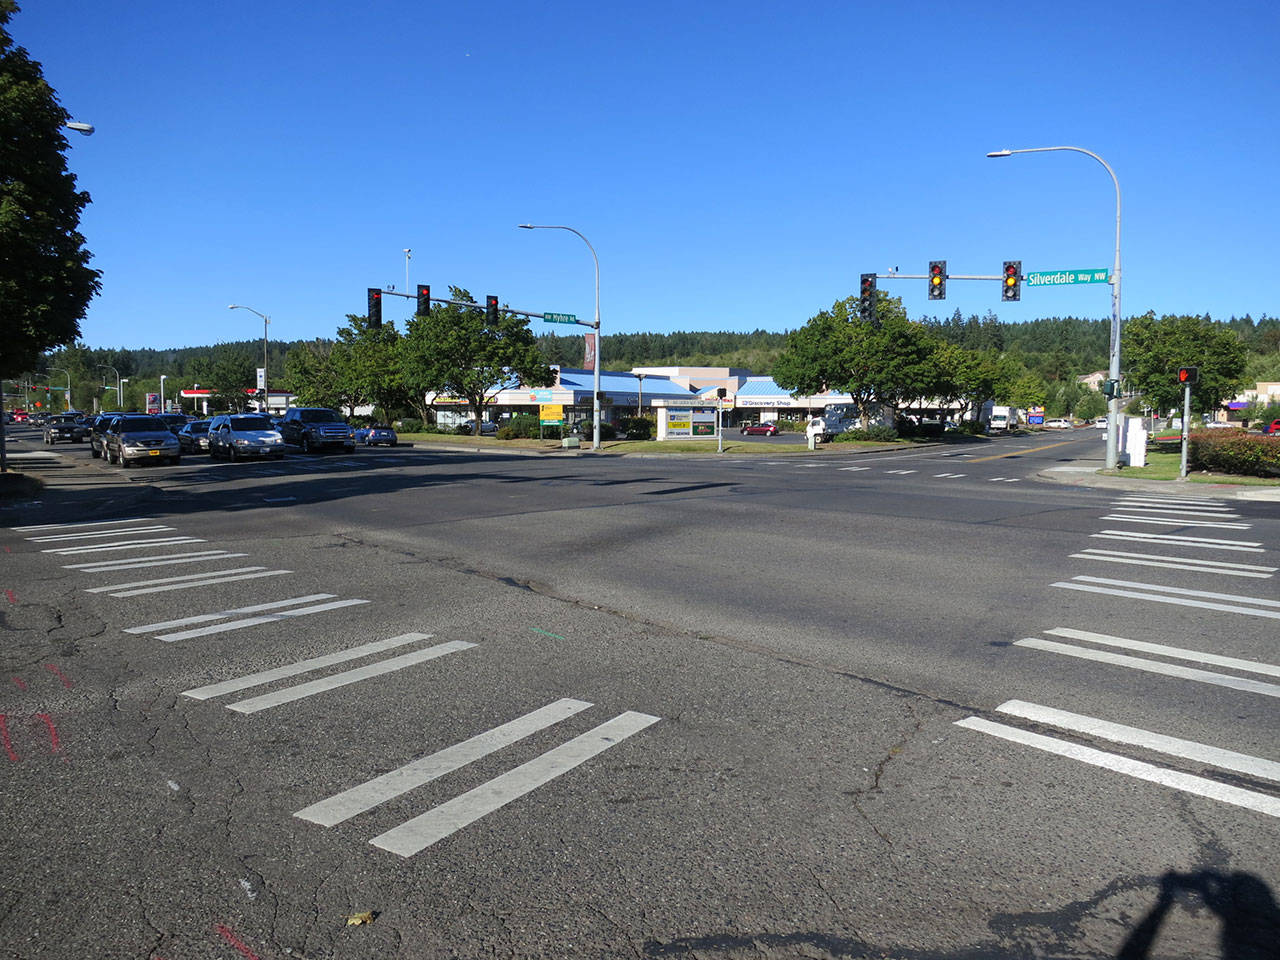 The intersection of Silverdale Way NW and NW Myhre Road will be closed 6 a.m. to 6 p.m. April 19 as Kitsap County Public Works prepares and paves the intersection.